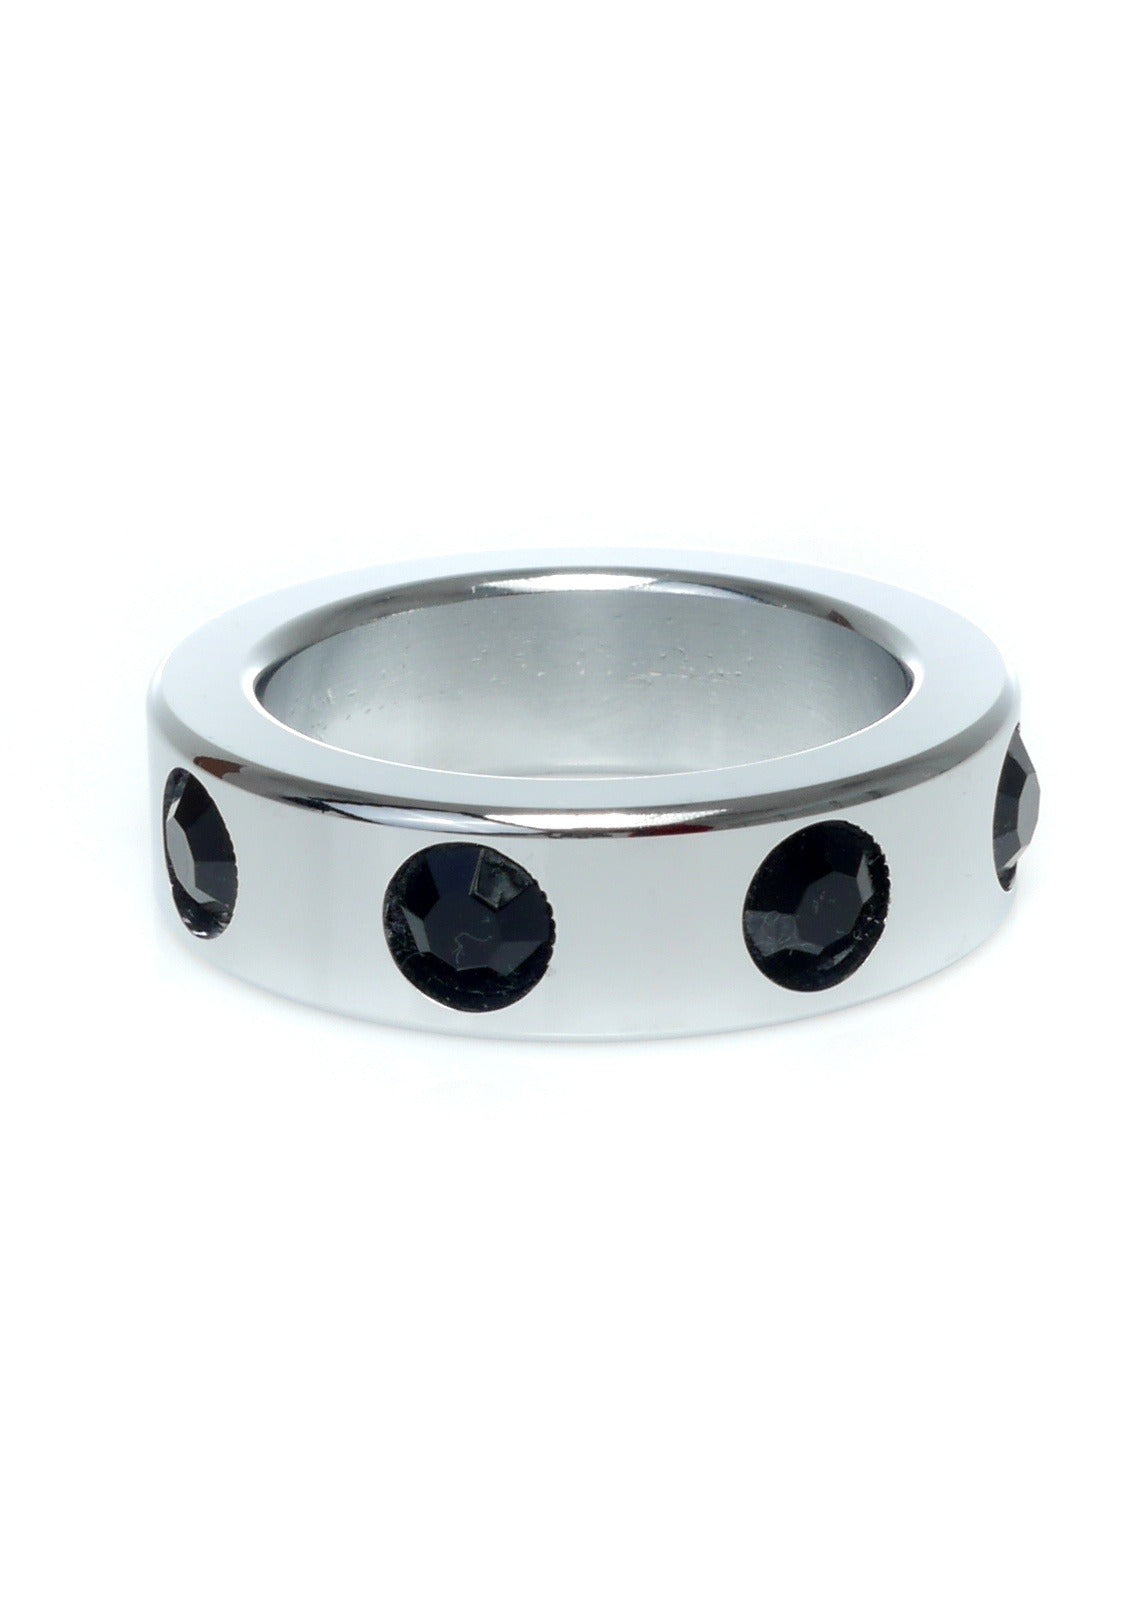 Bossoftoys - 64-00120 - Stainless steel - Metal Cockring - with Black Diamond stones - Medium size - inner dia 3,5 CM - outer dia 4,5 CM